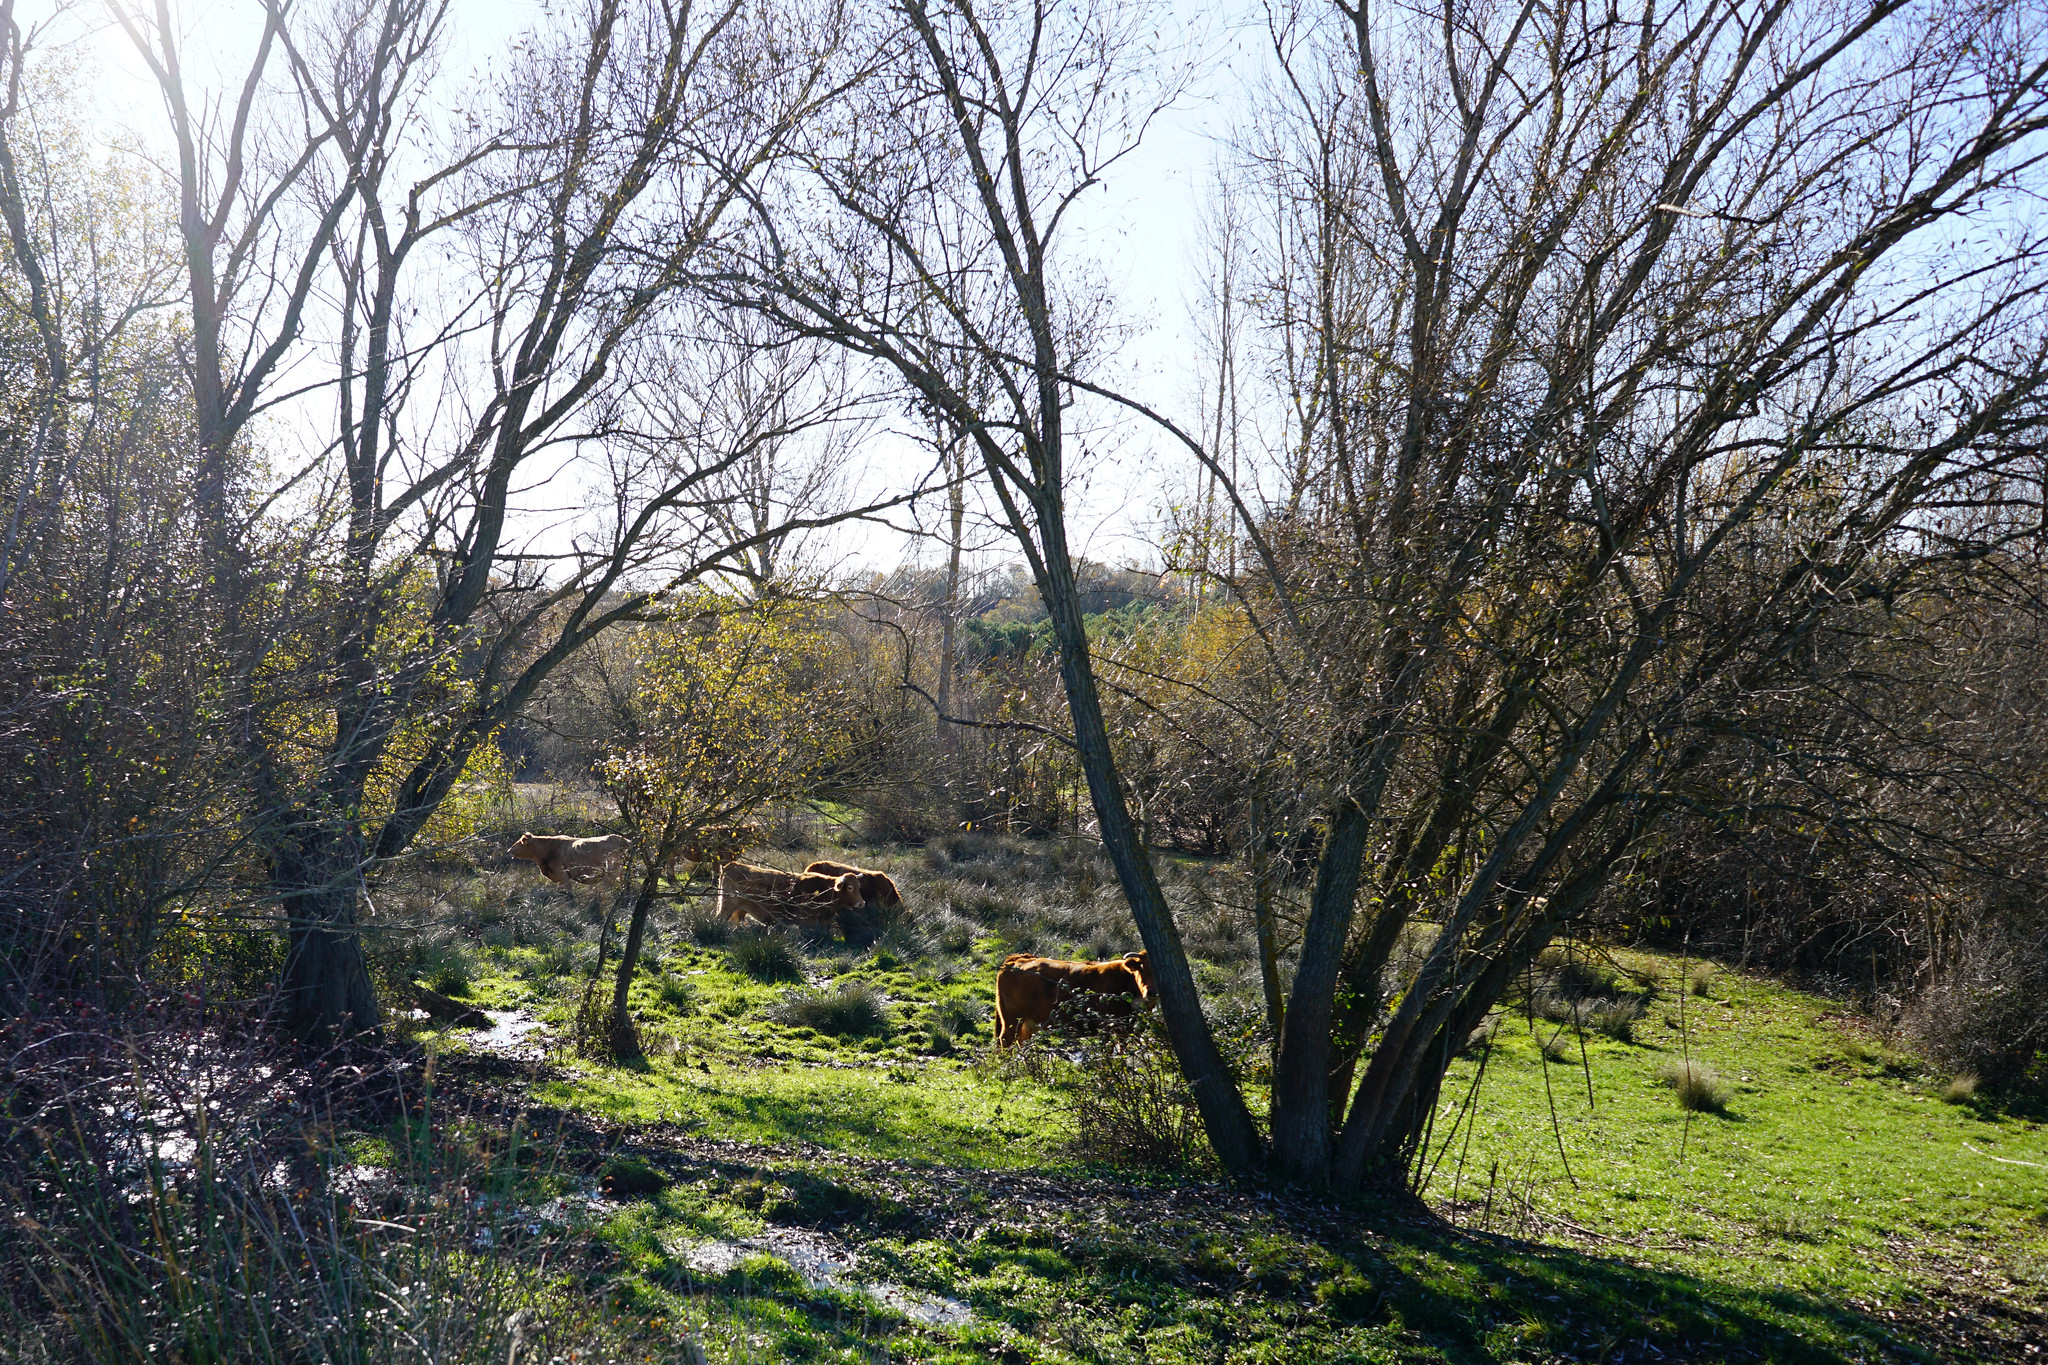 Landscape in the region of La Sobarriba (León), where the project is taking place.